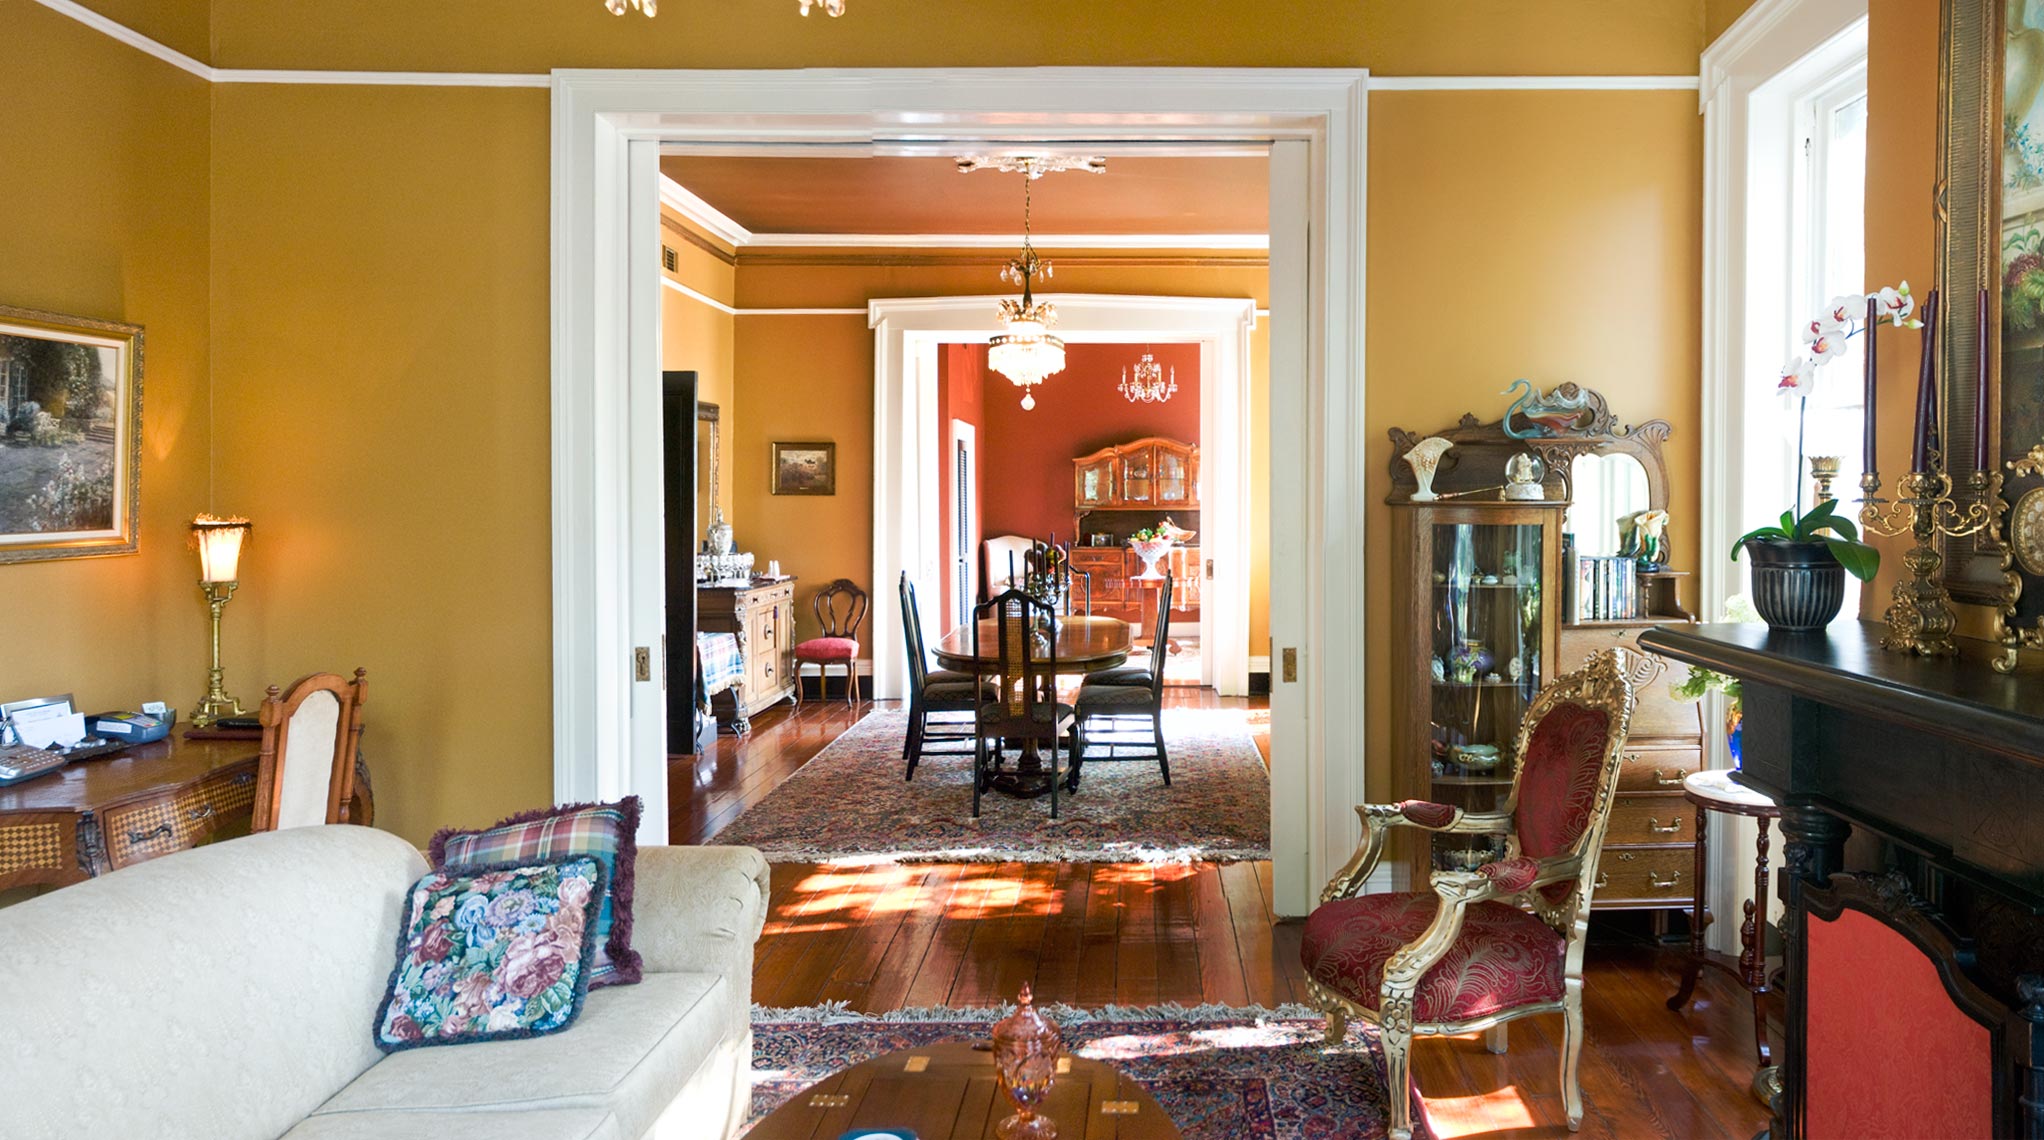 bright terracotta color in the style of the hallway